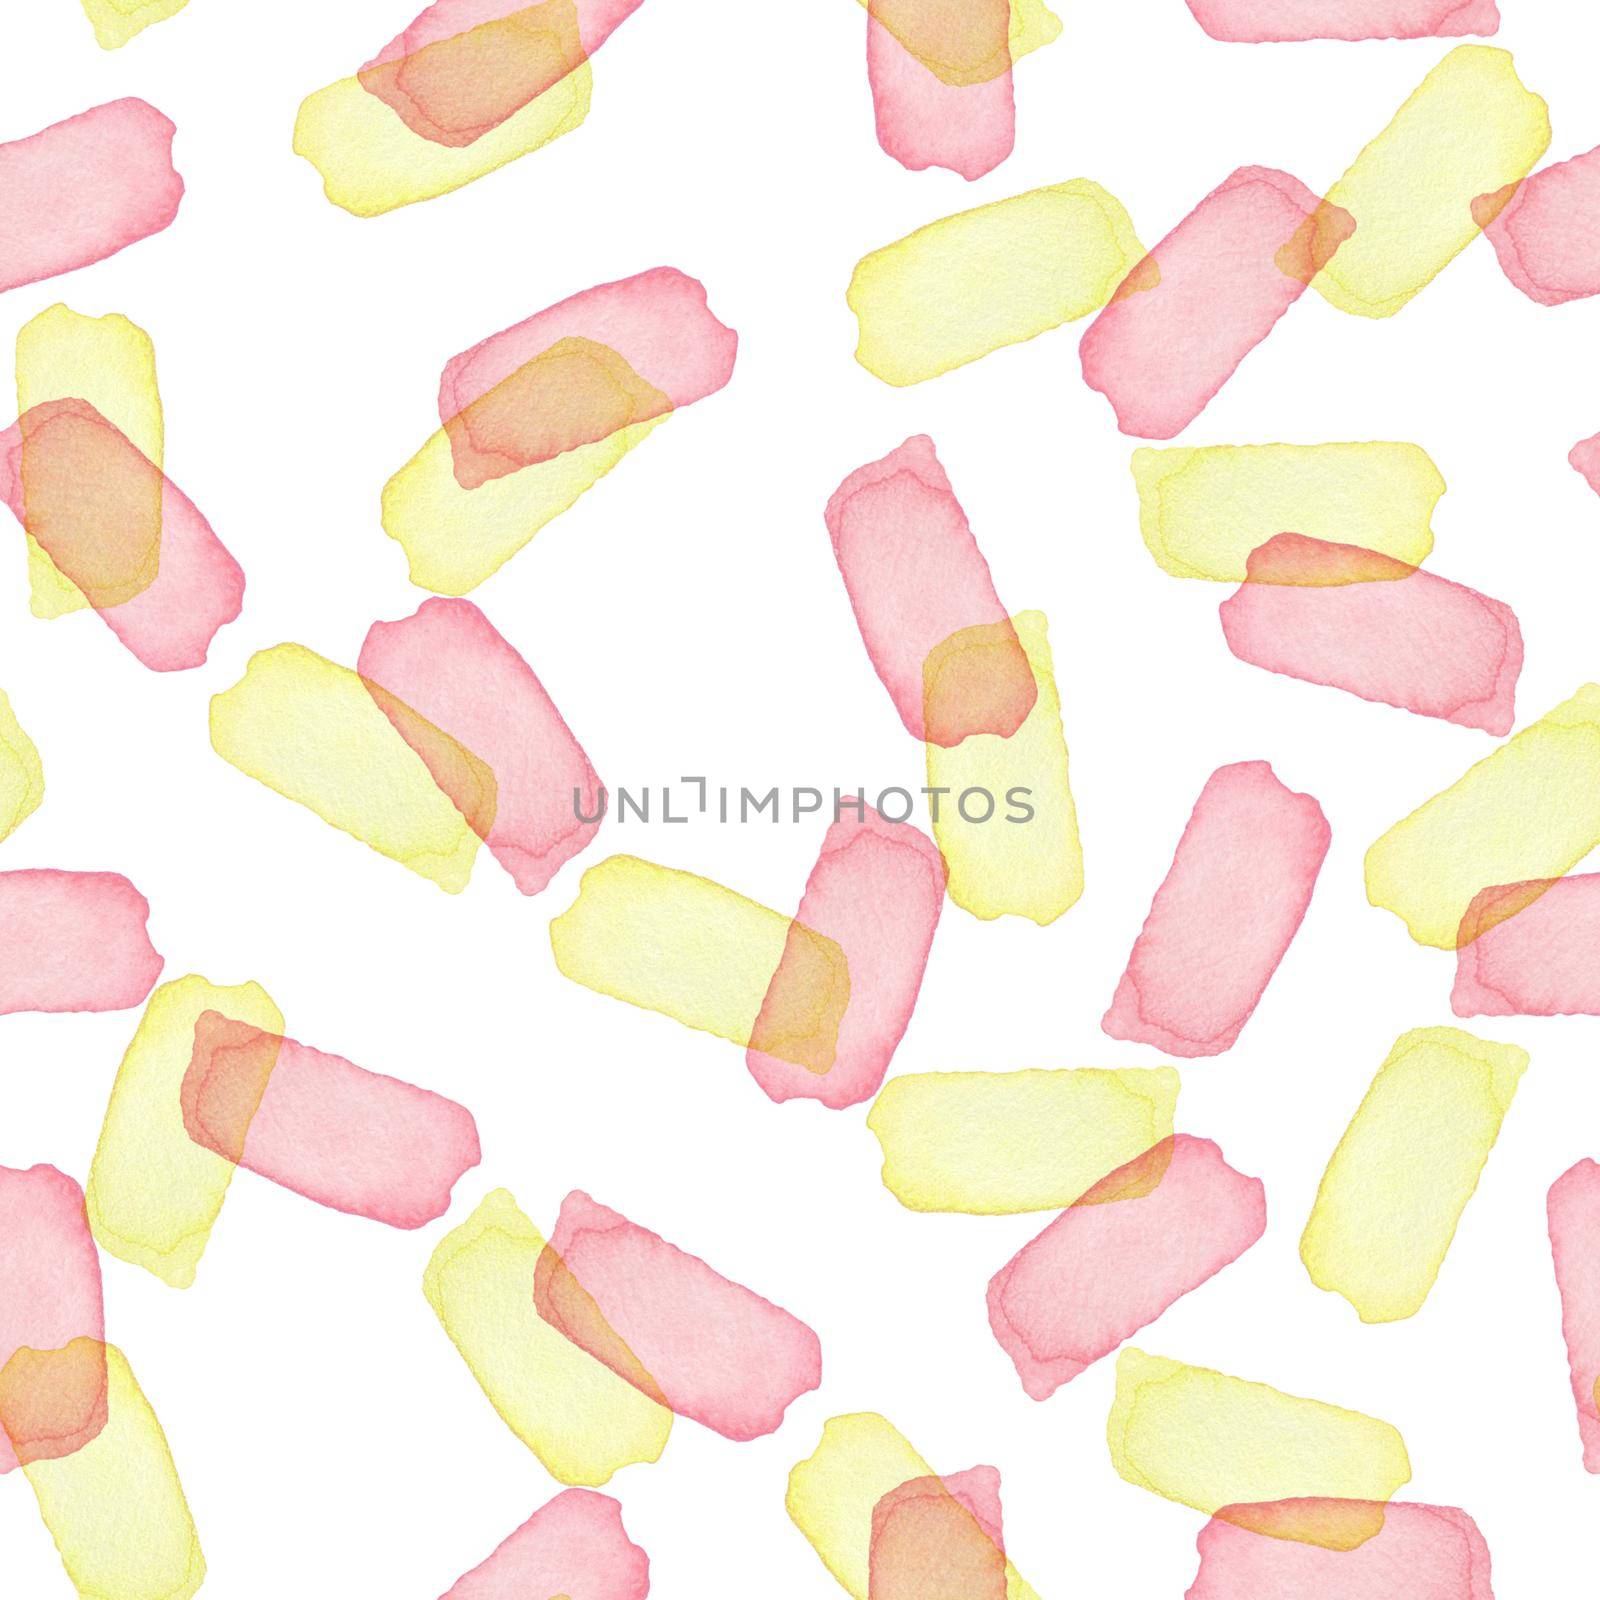 Hand Painted Brush Stroke Seamless Watercolor Pattern. Abstract watercolour shapes in Pink Girly and Light Yellow Color. Artistic Design by DesignAB